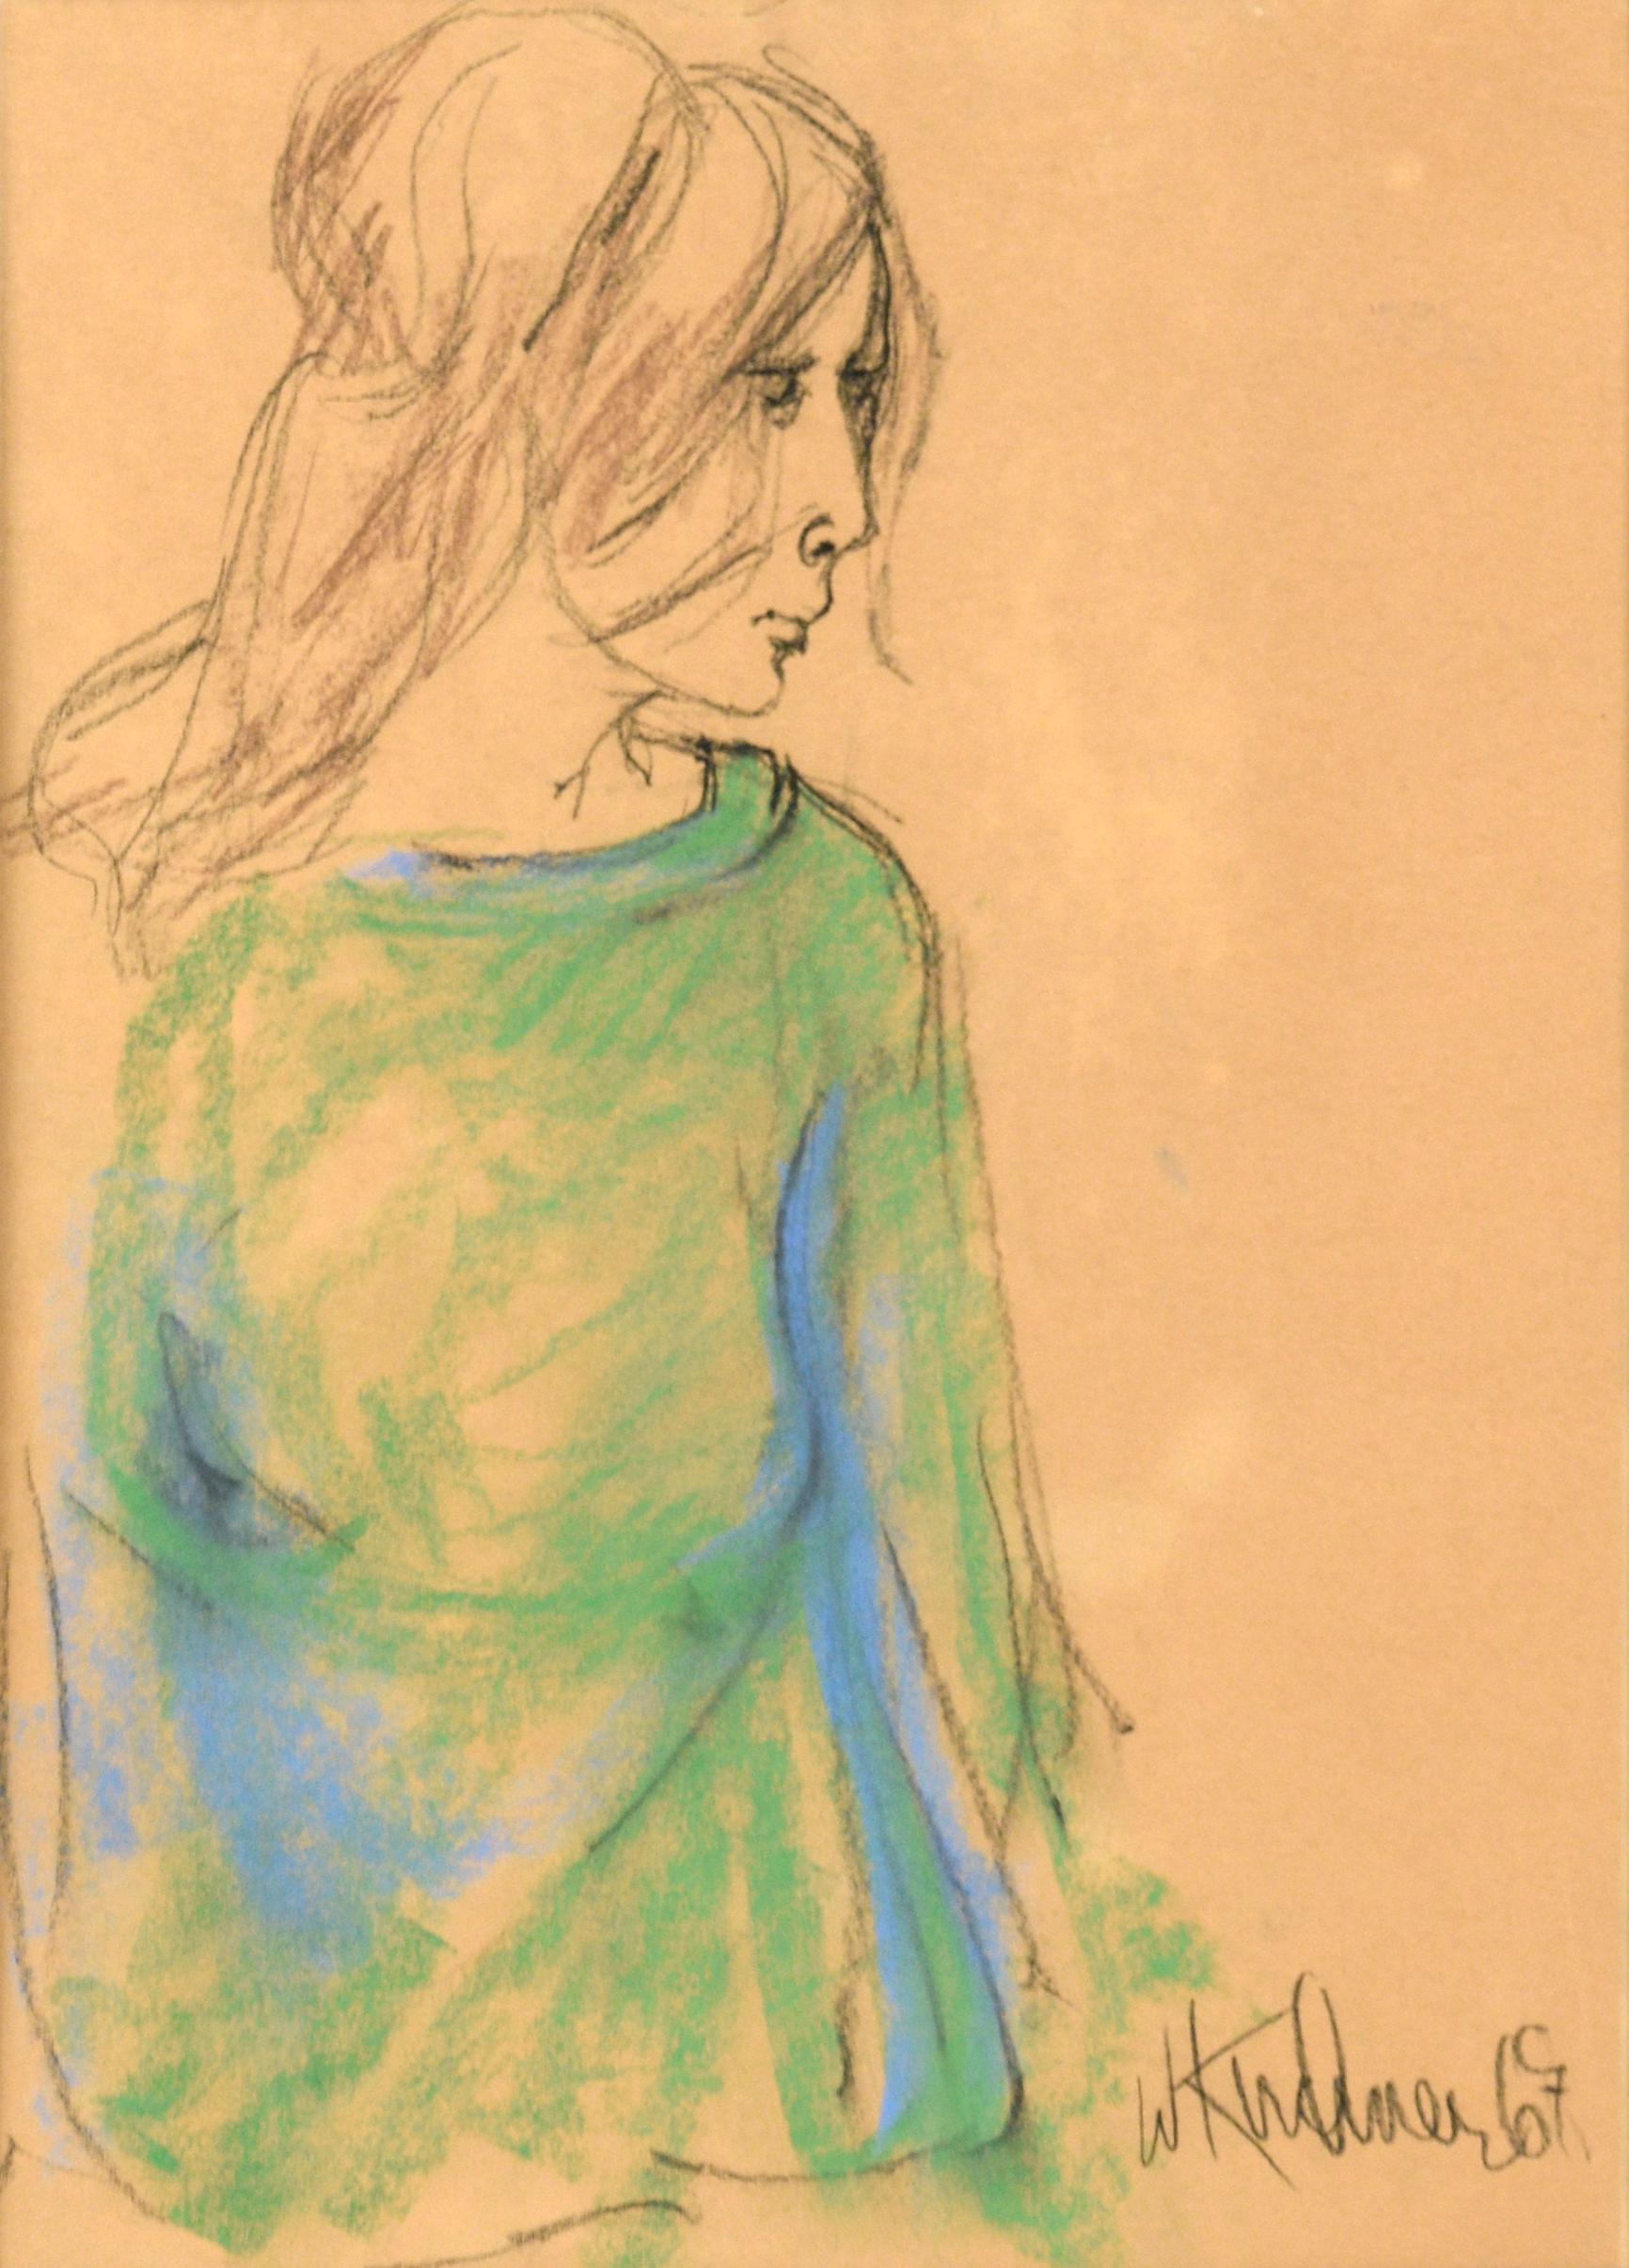 Portrait of a Woman in a Green Shirt -San Francisco Bay Area Figurative Movement - Art by William Kirchner